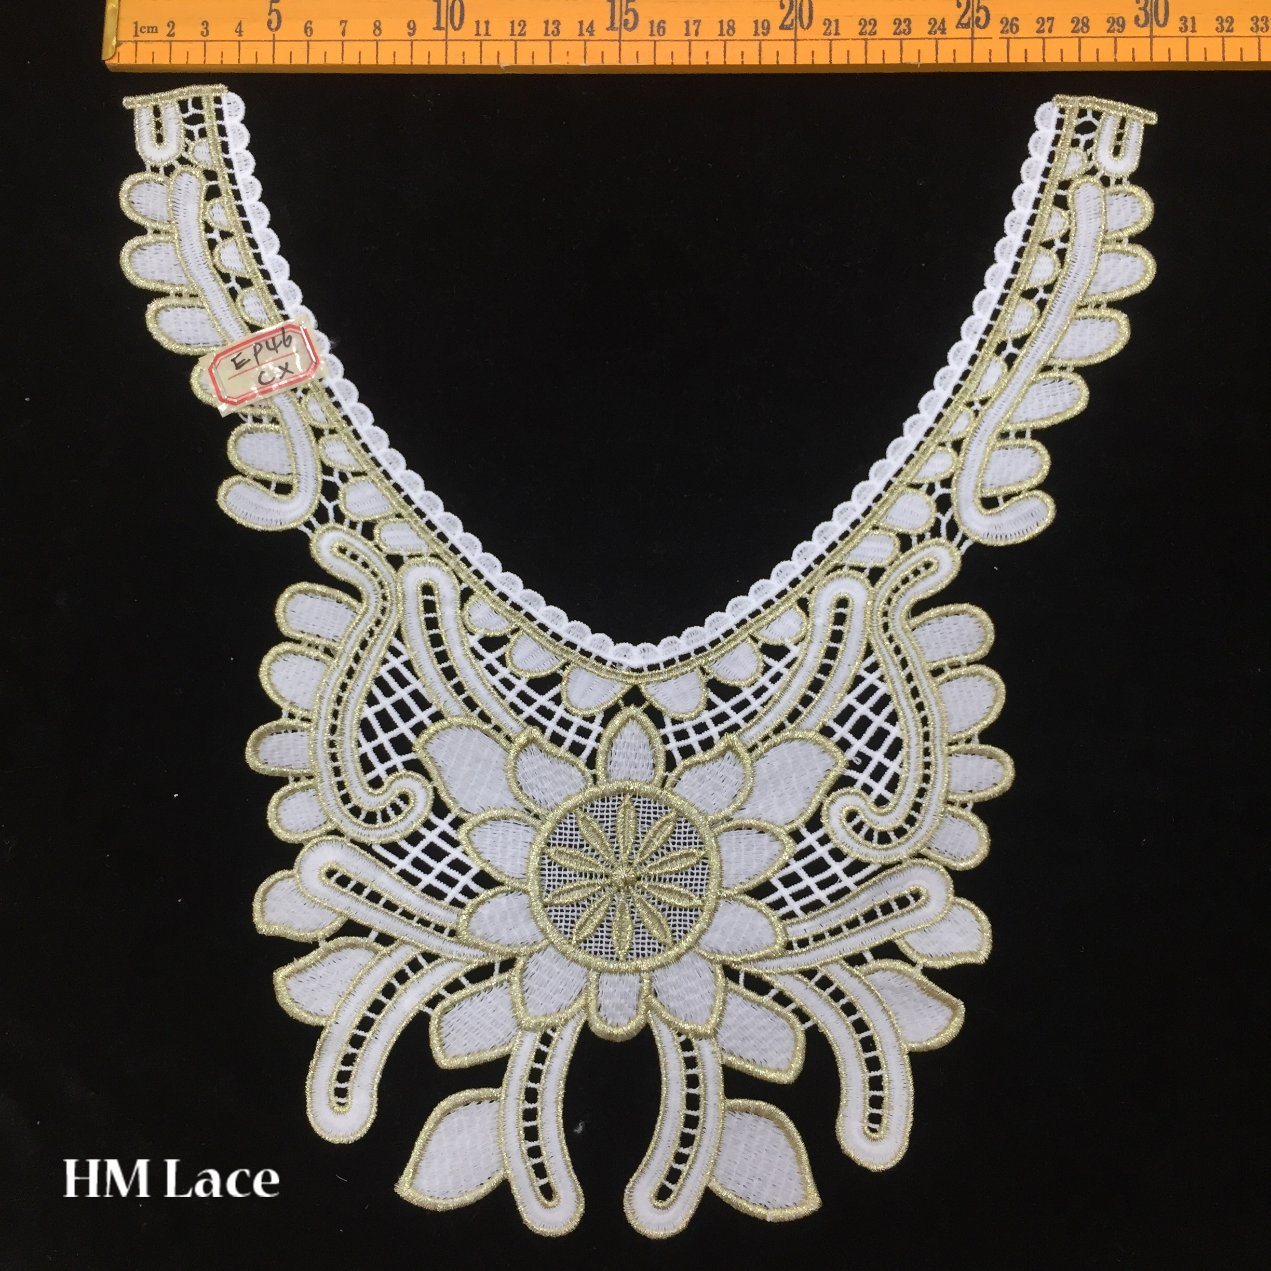 30*30cm Gold Collar Lace with Sun Flower Totem for Female Garment Accessories Hme946